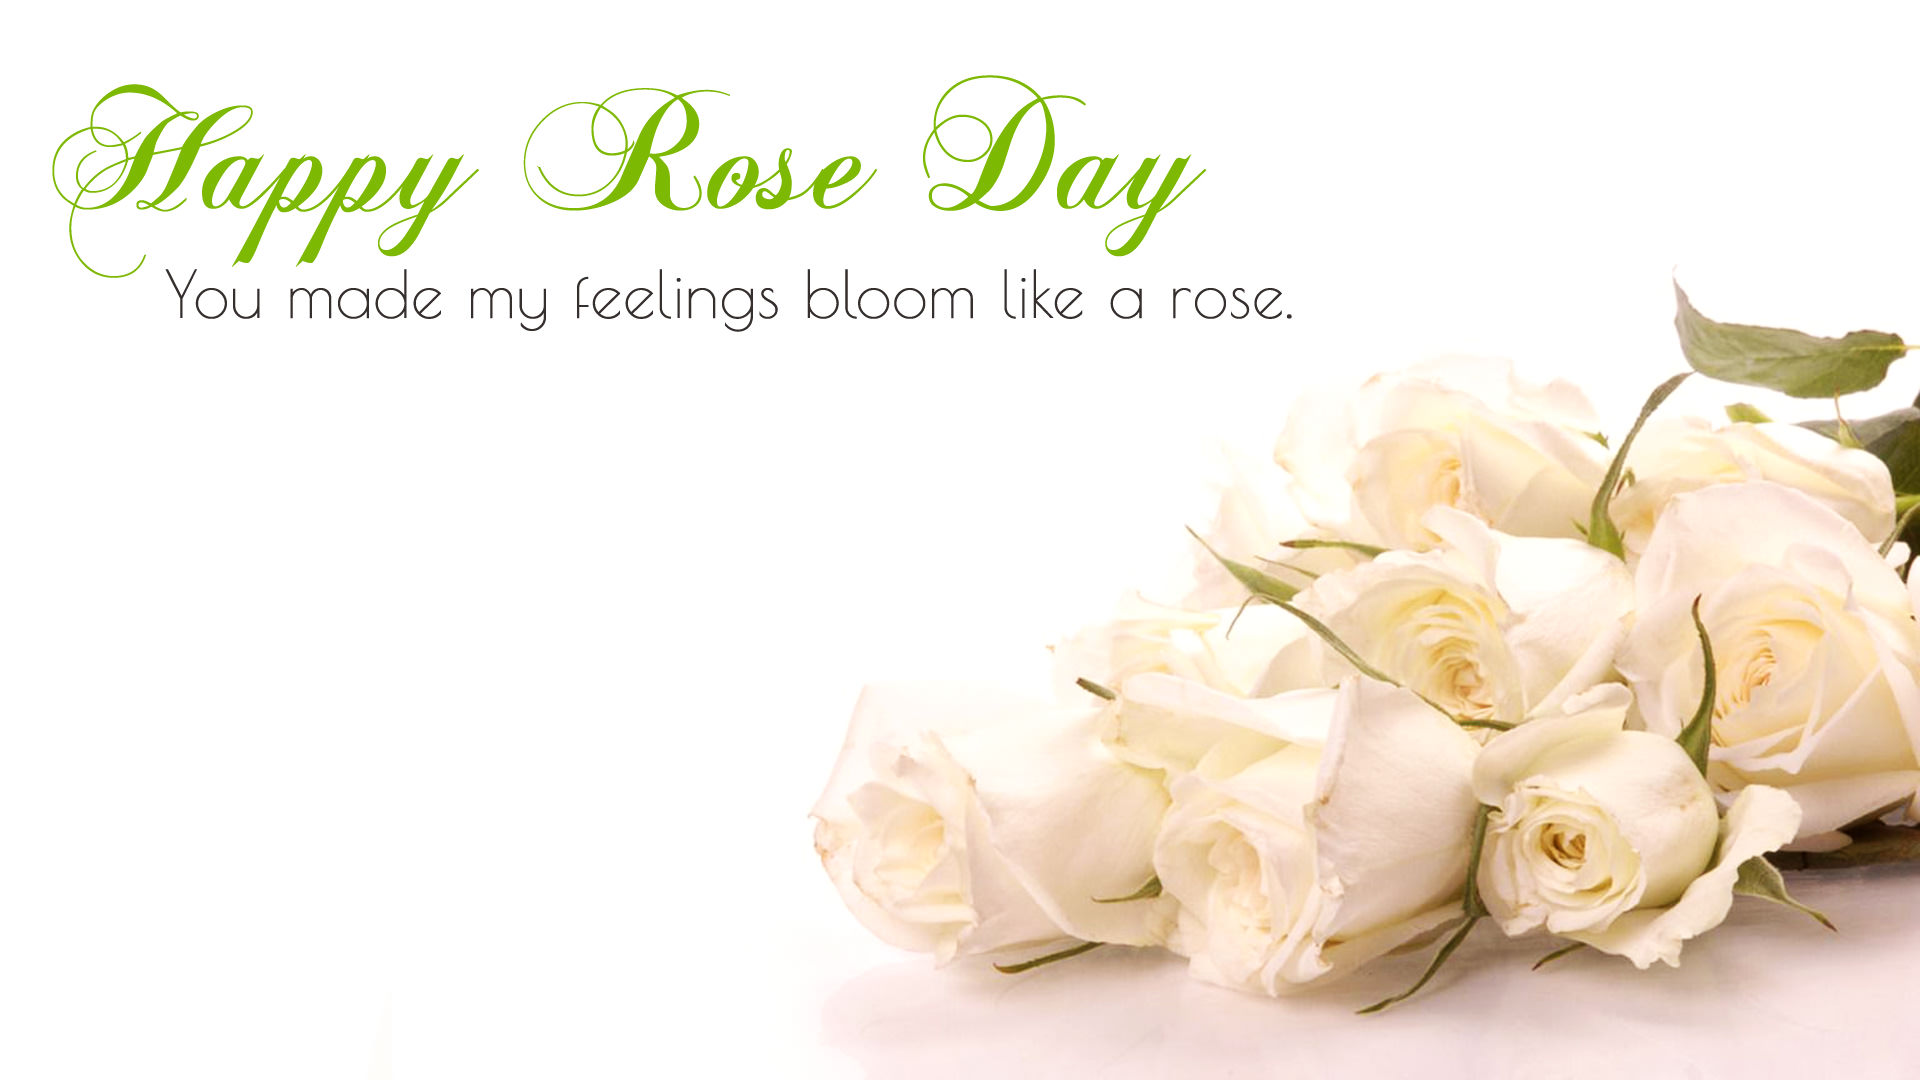 White Valentine Day Roses for 7th Feb Rose Day